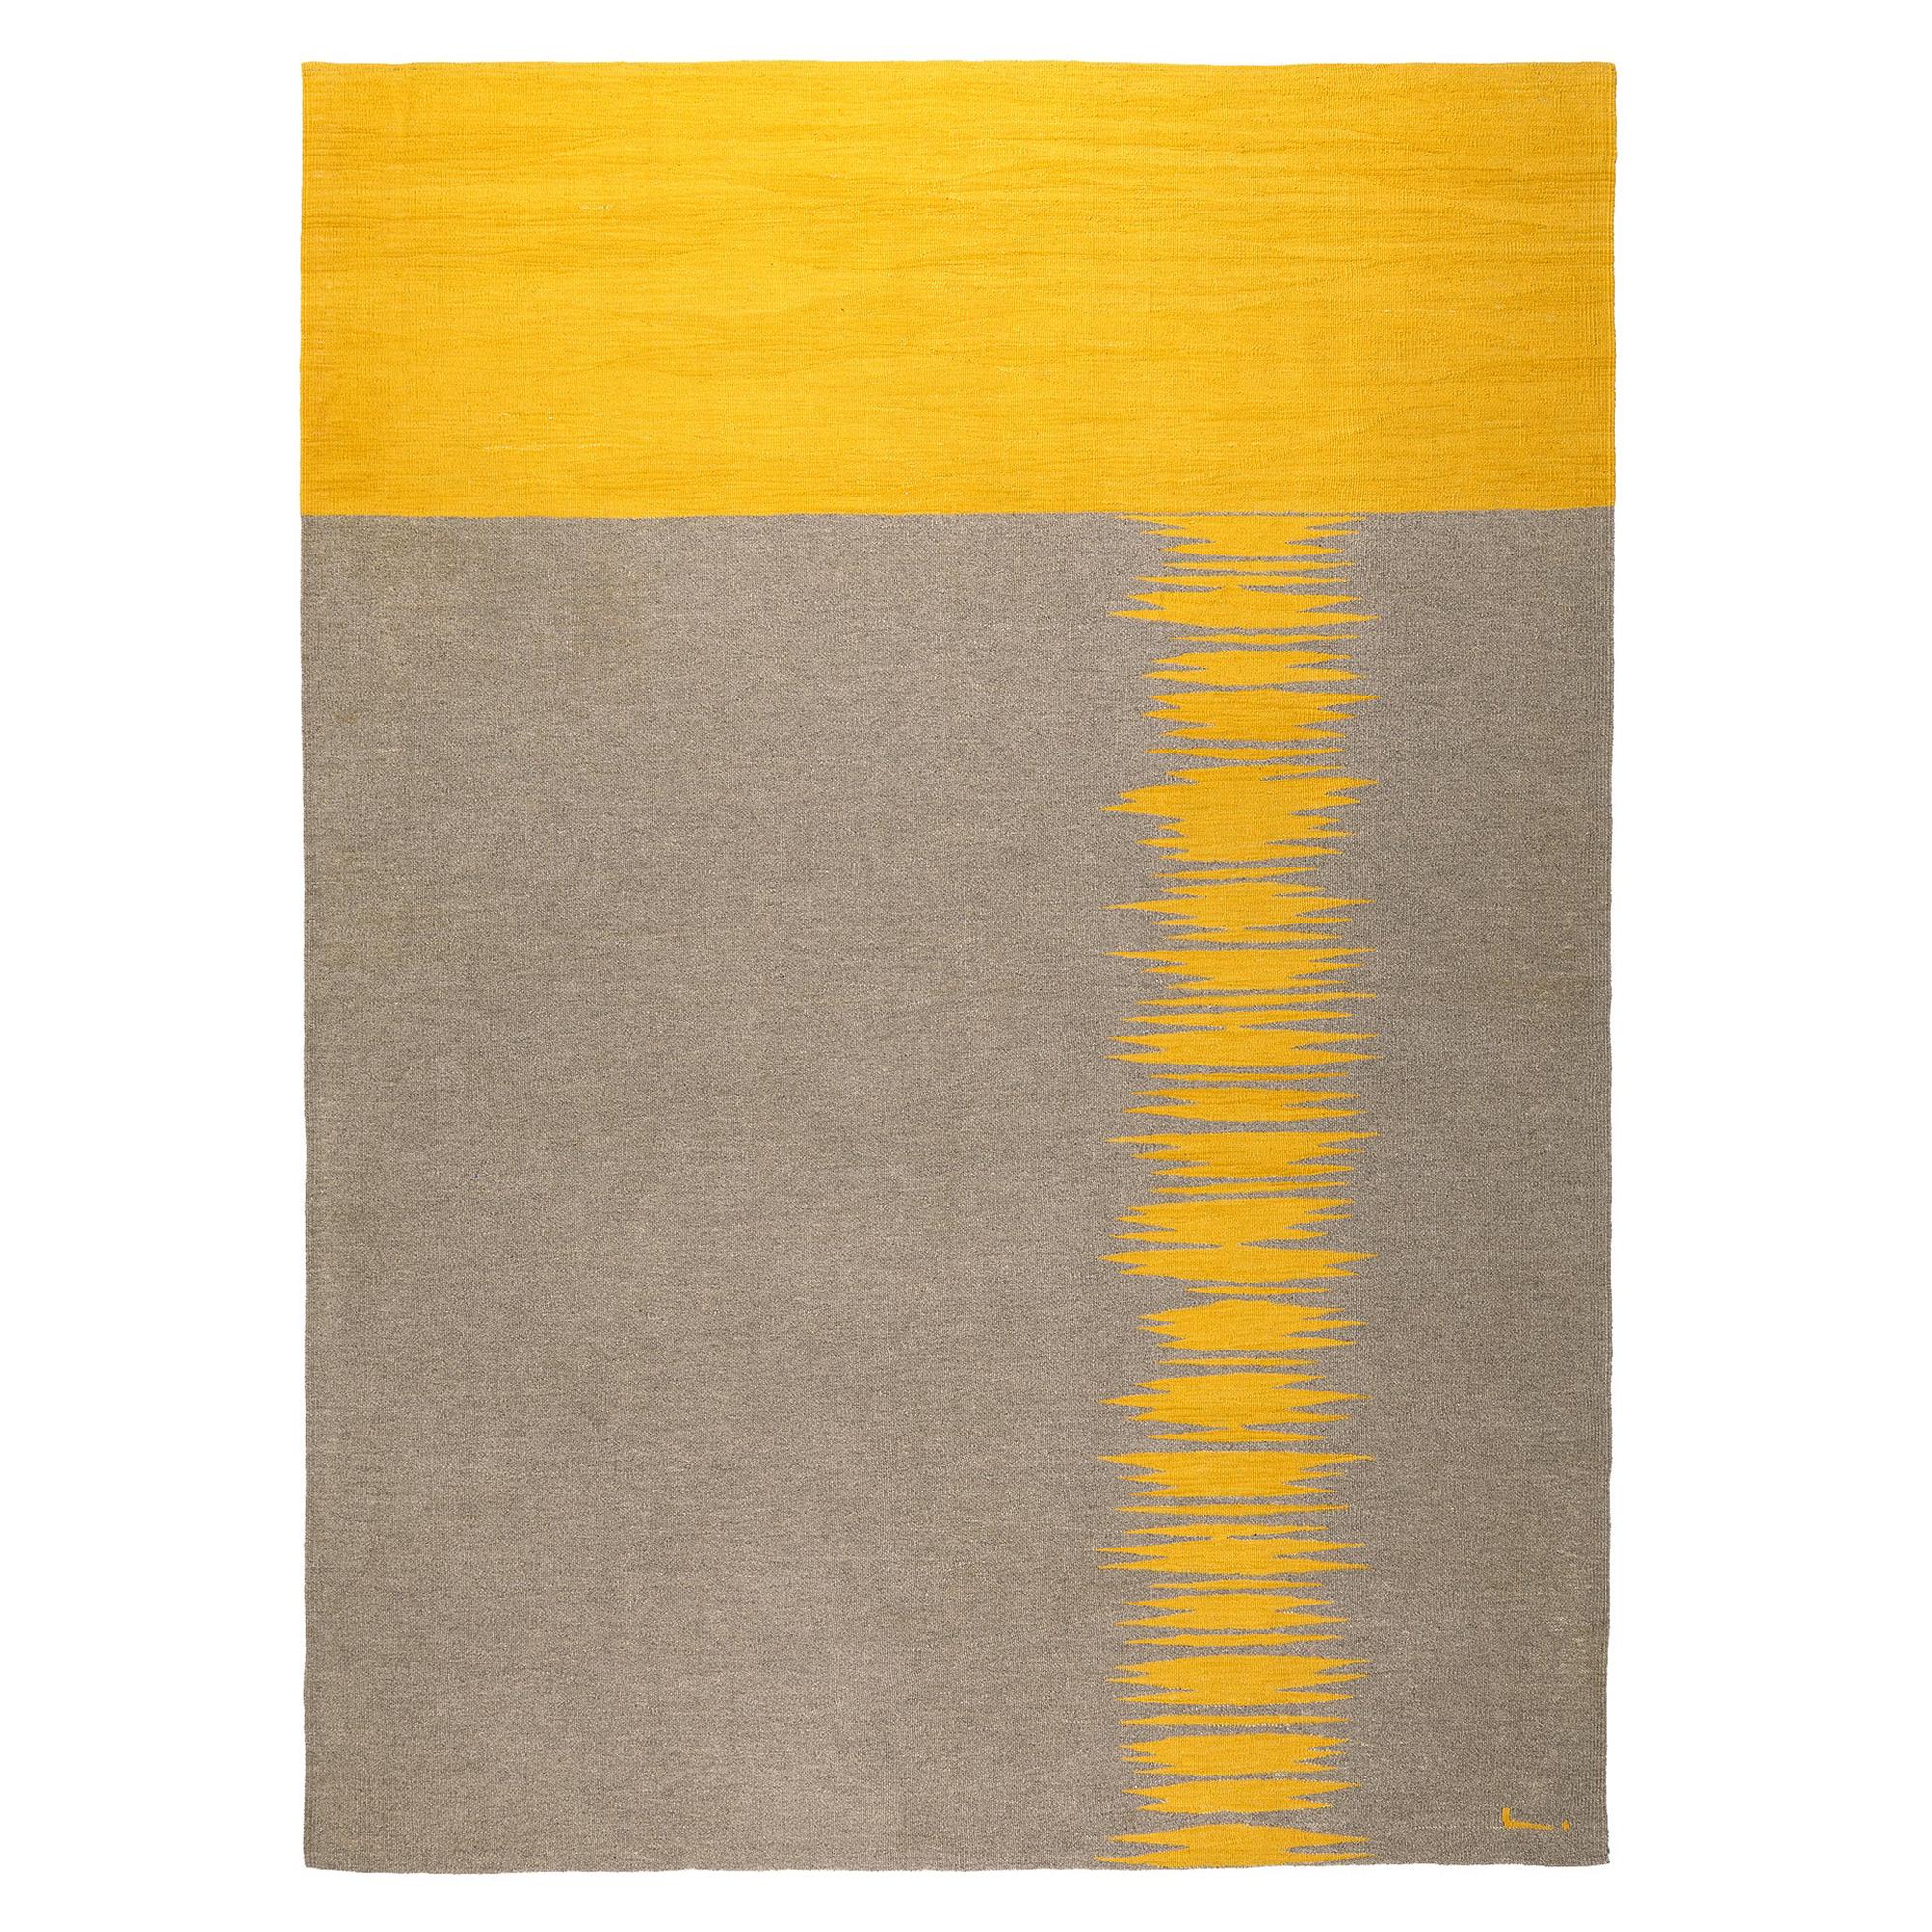 Yakamoz No 6 Contemporary Kilim Rug Wool Handwoven Earthy Gray and Yellow For Sale